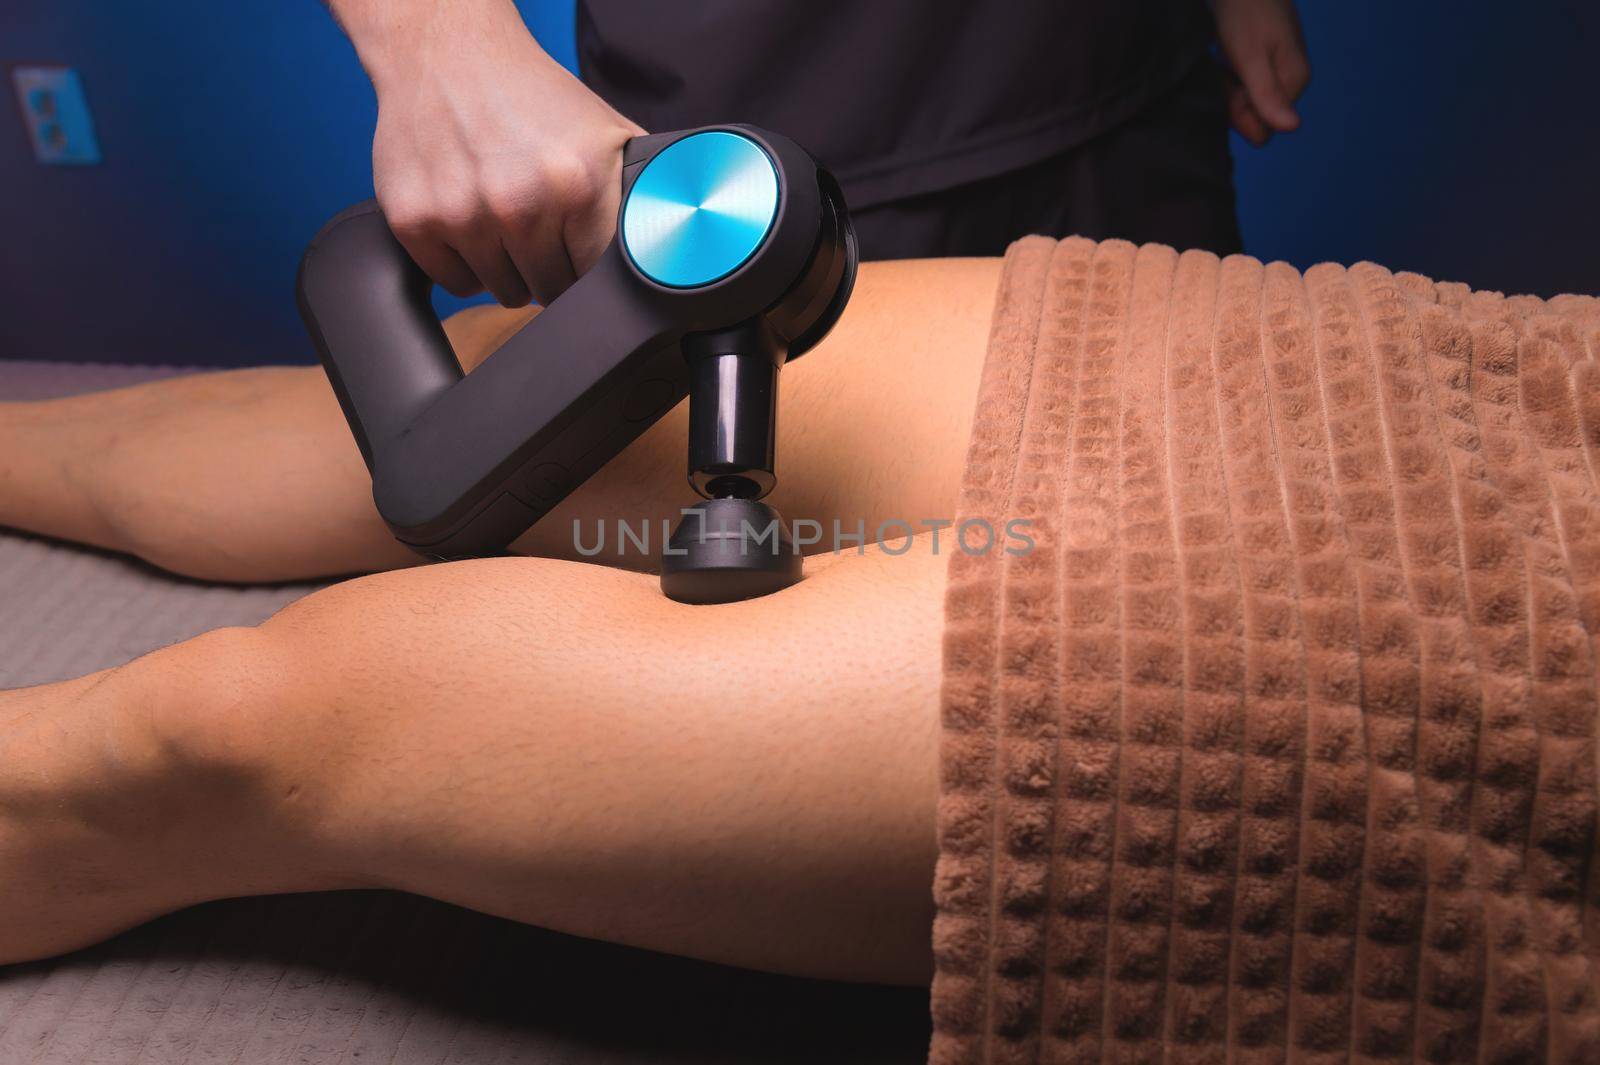 Close-up percussion thigh massage with a special electric device.